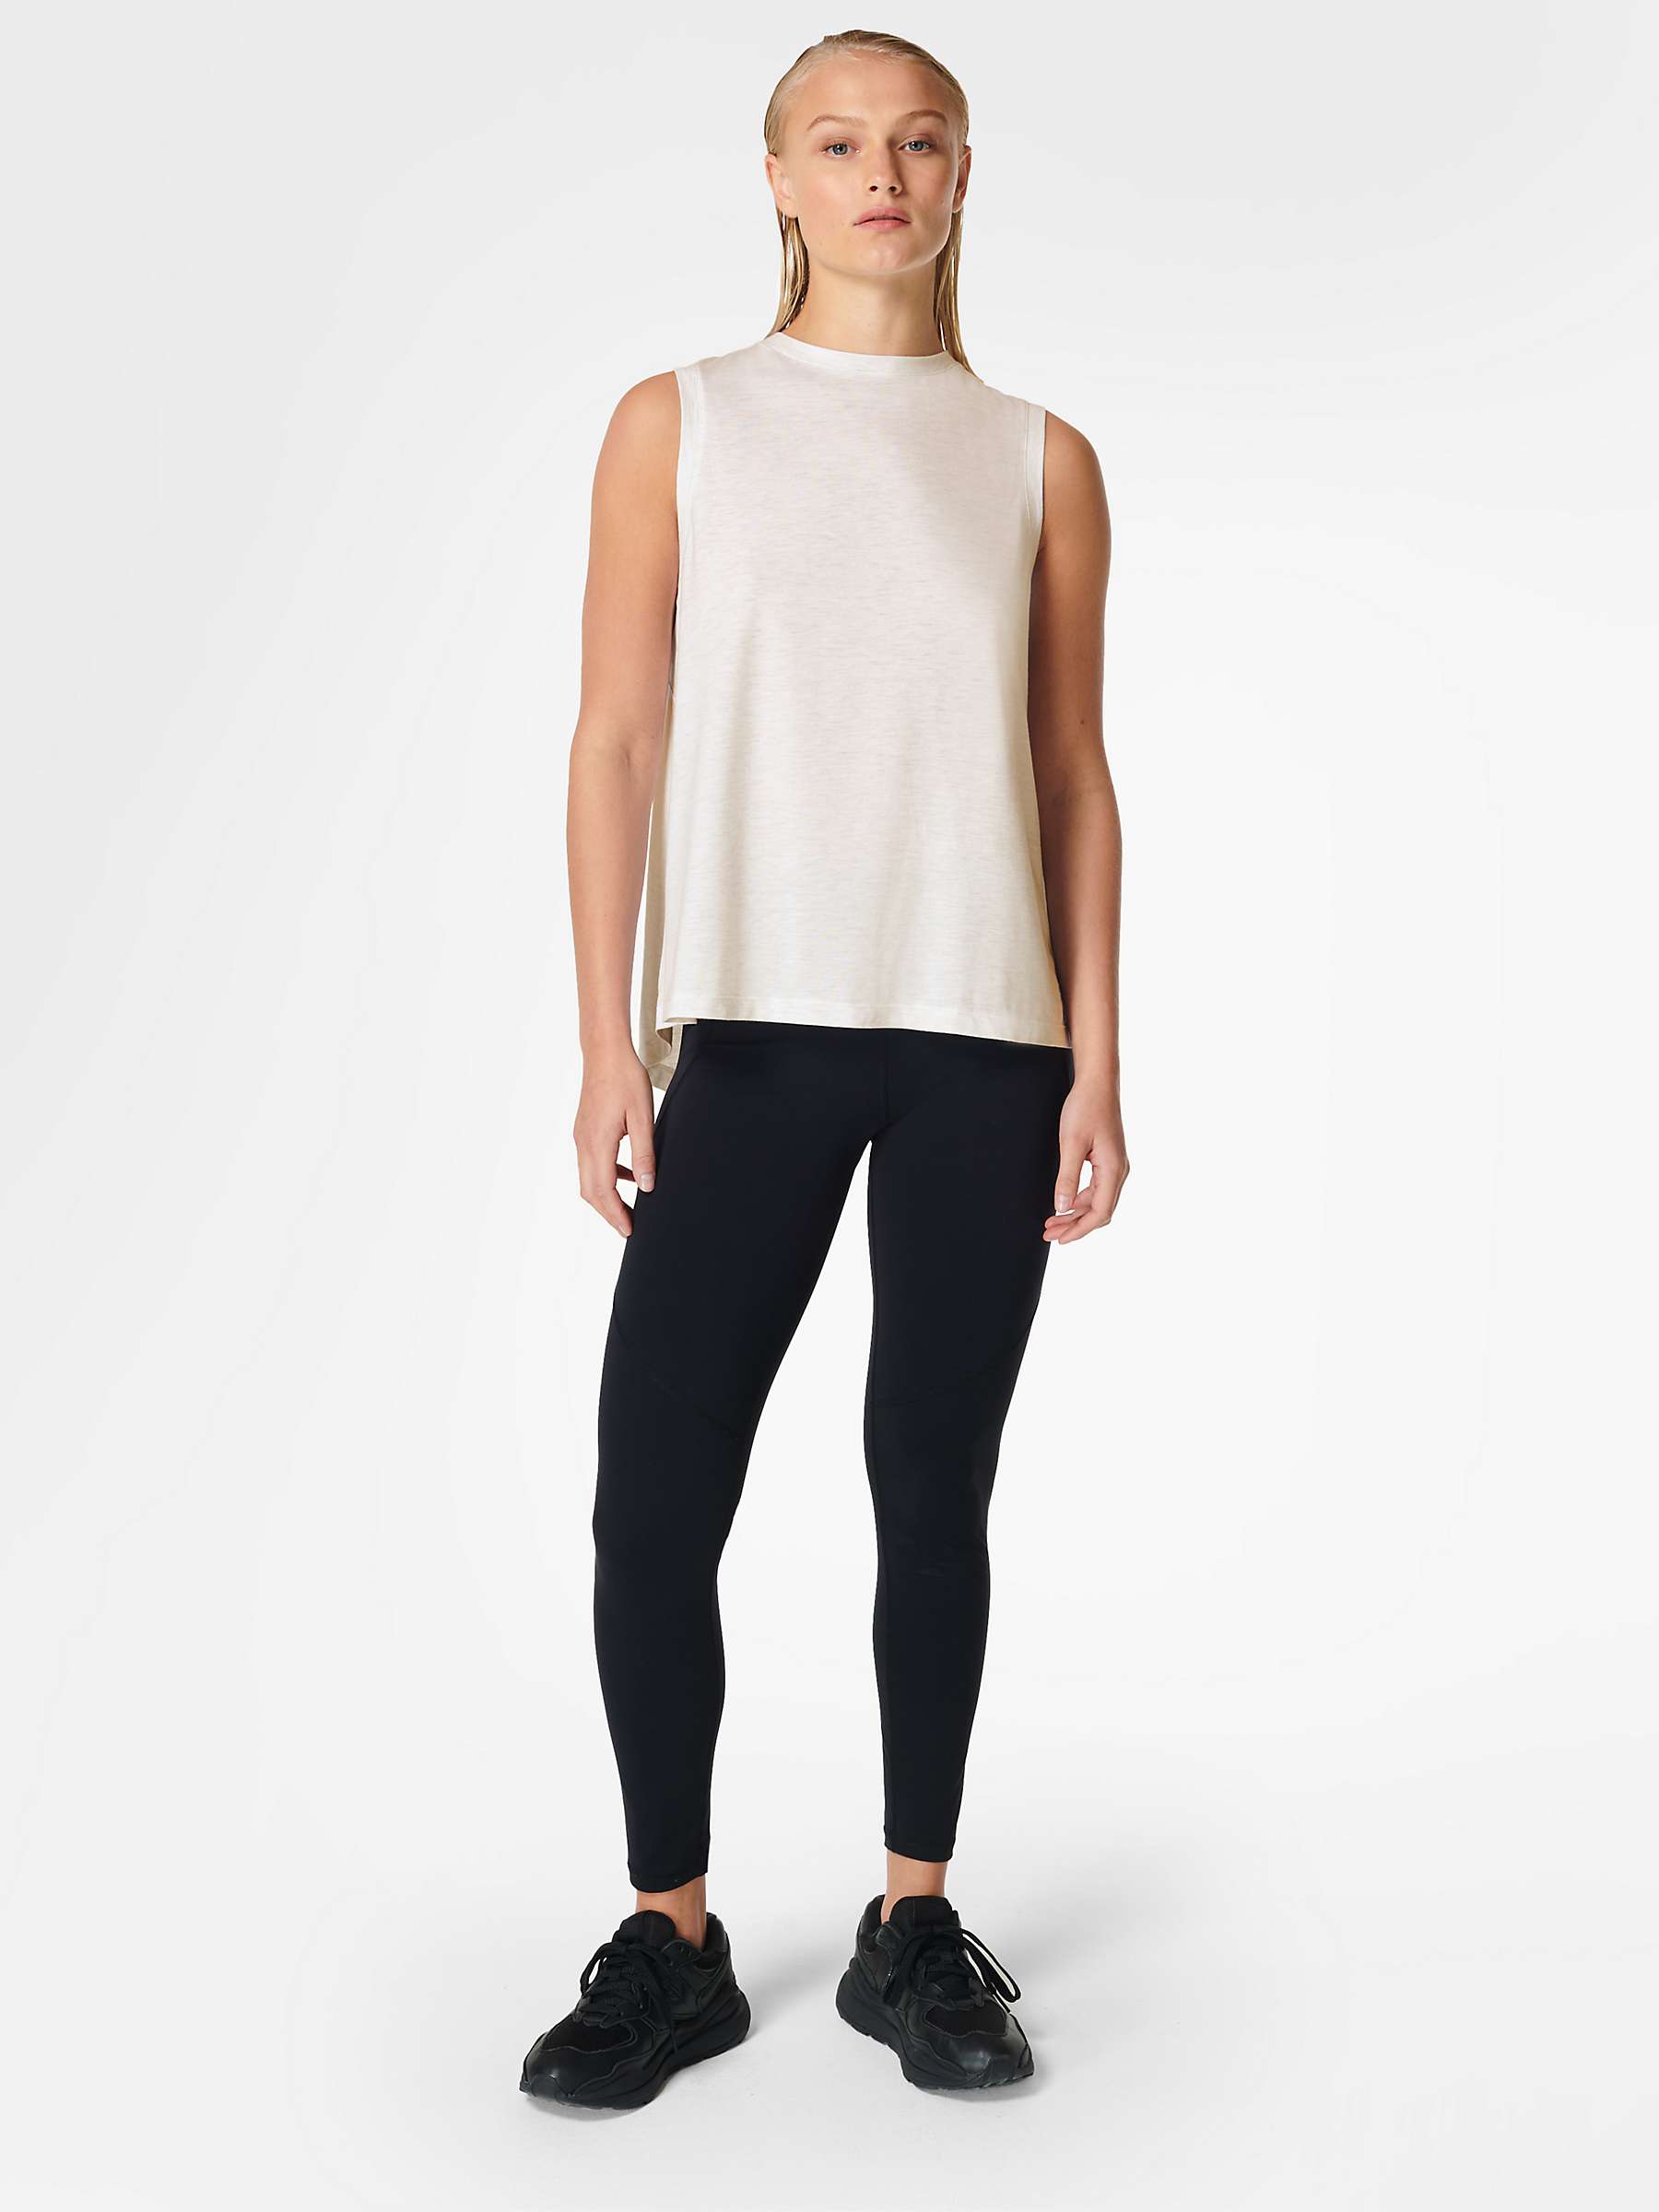 Sweaty Betty Focus Training Tank Top, Lily White at John Lewis & Partners